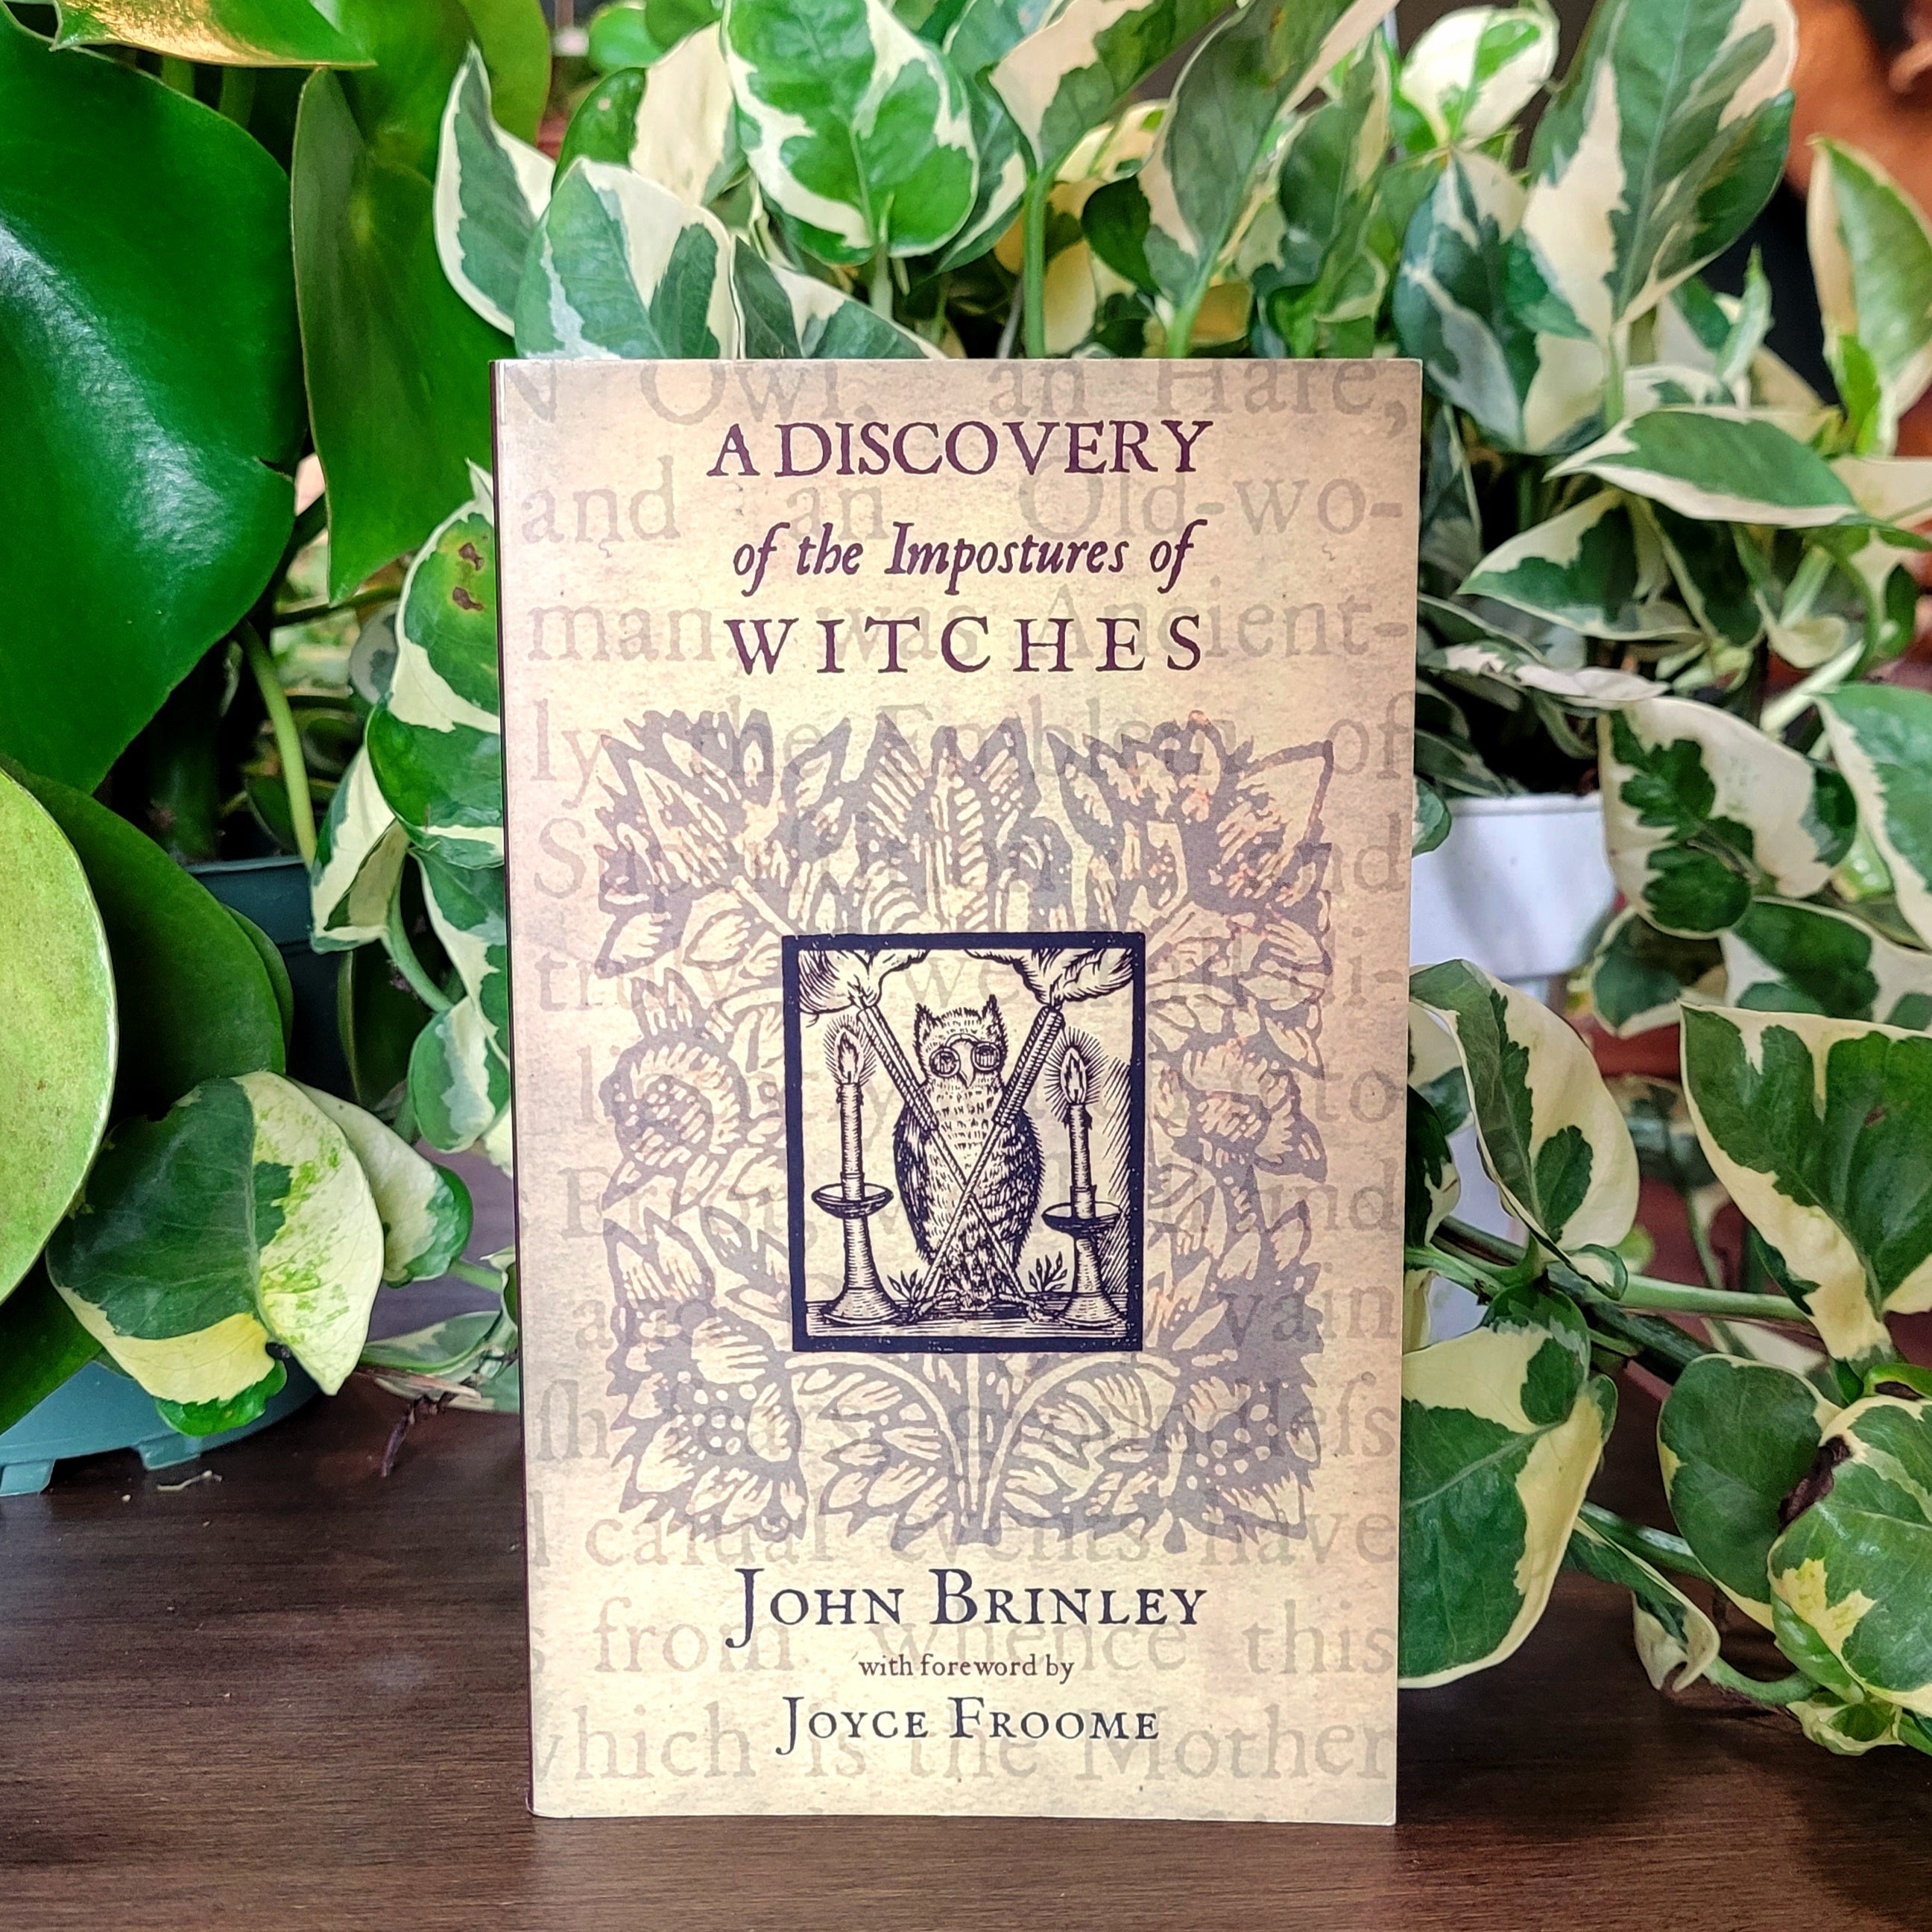 John　of　A　Witches　Impostures　Astrologers　by　Discovery　and　of　the　Brinl